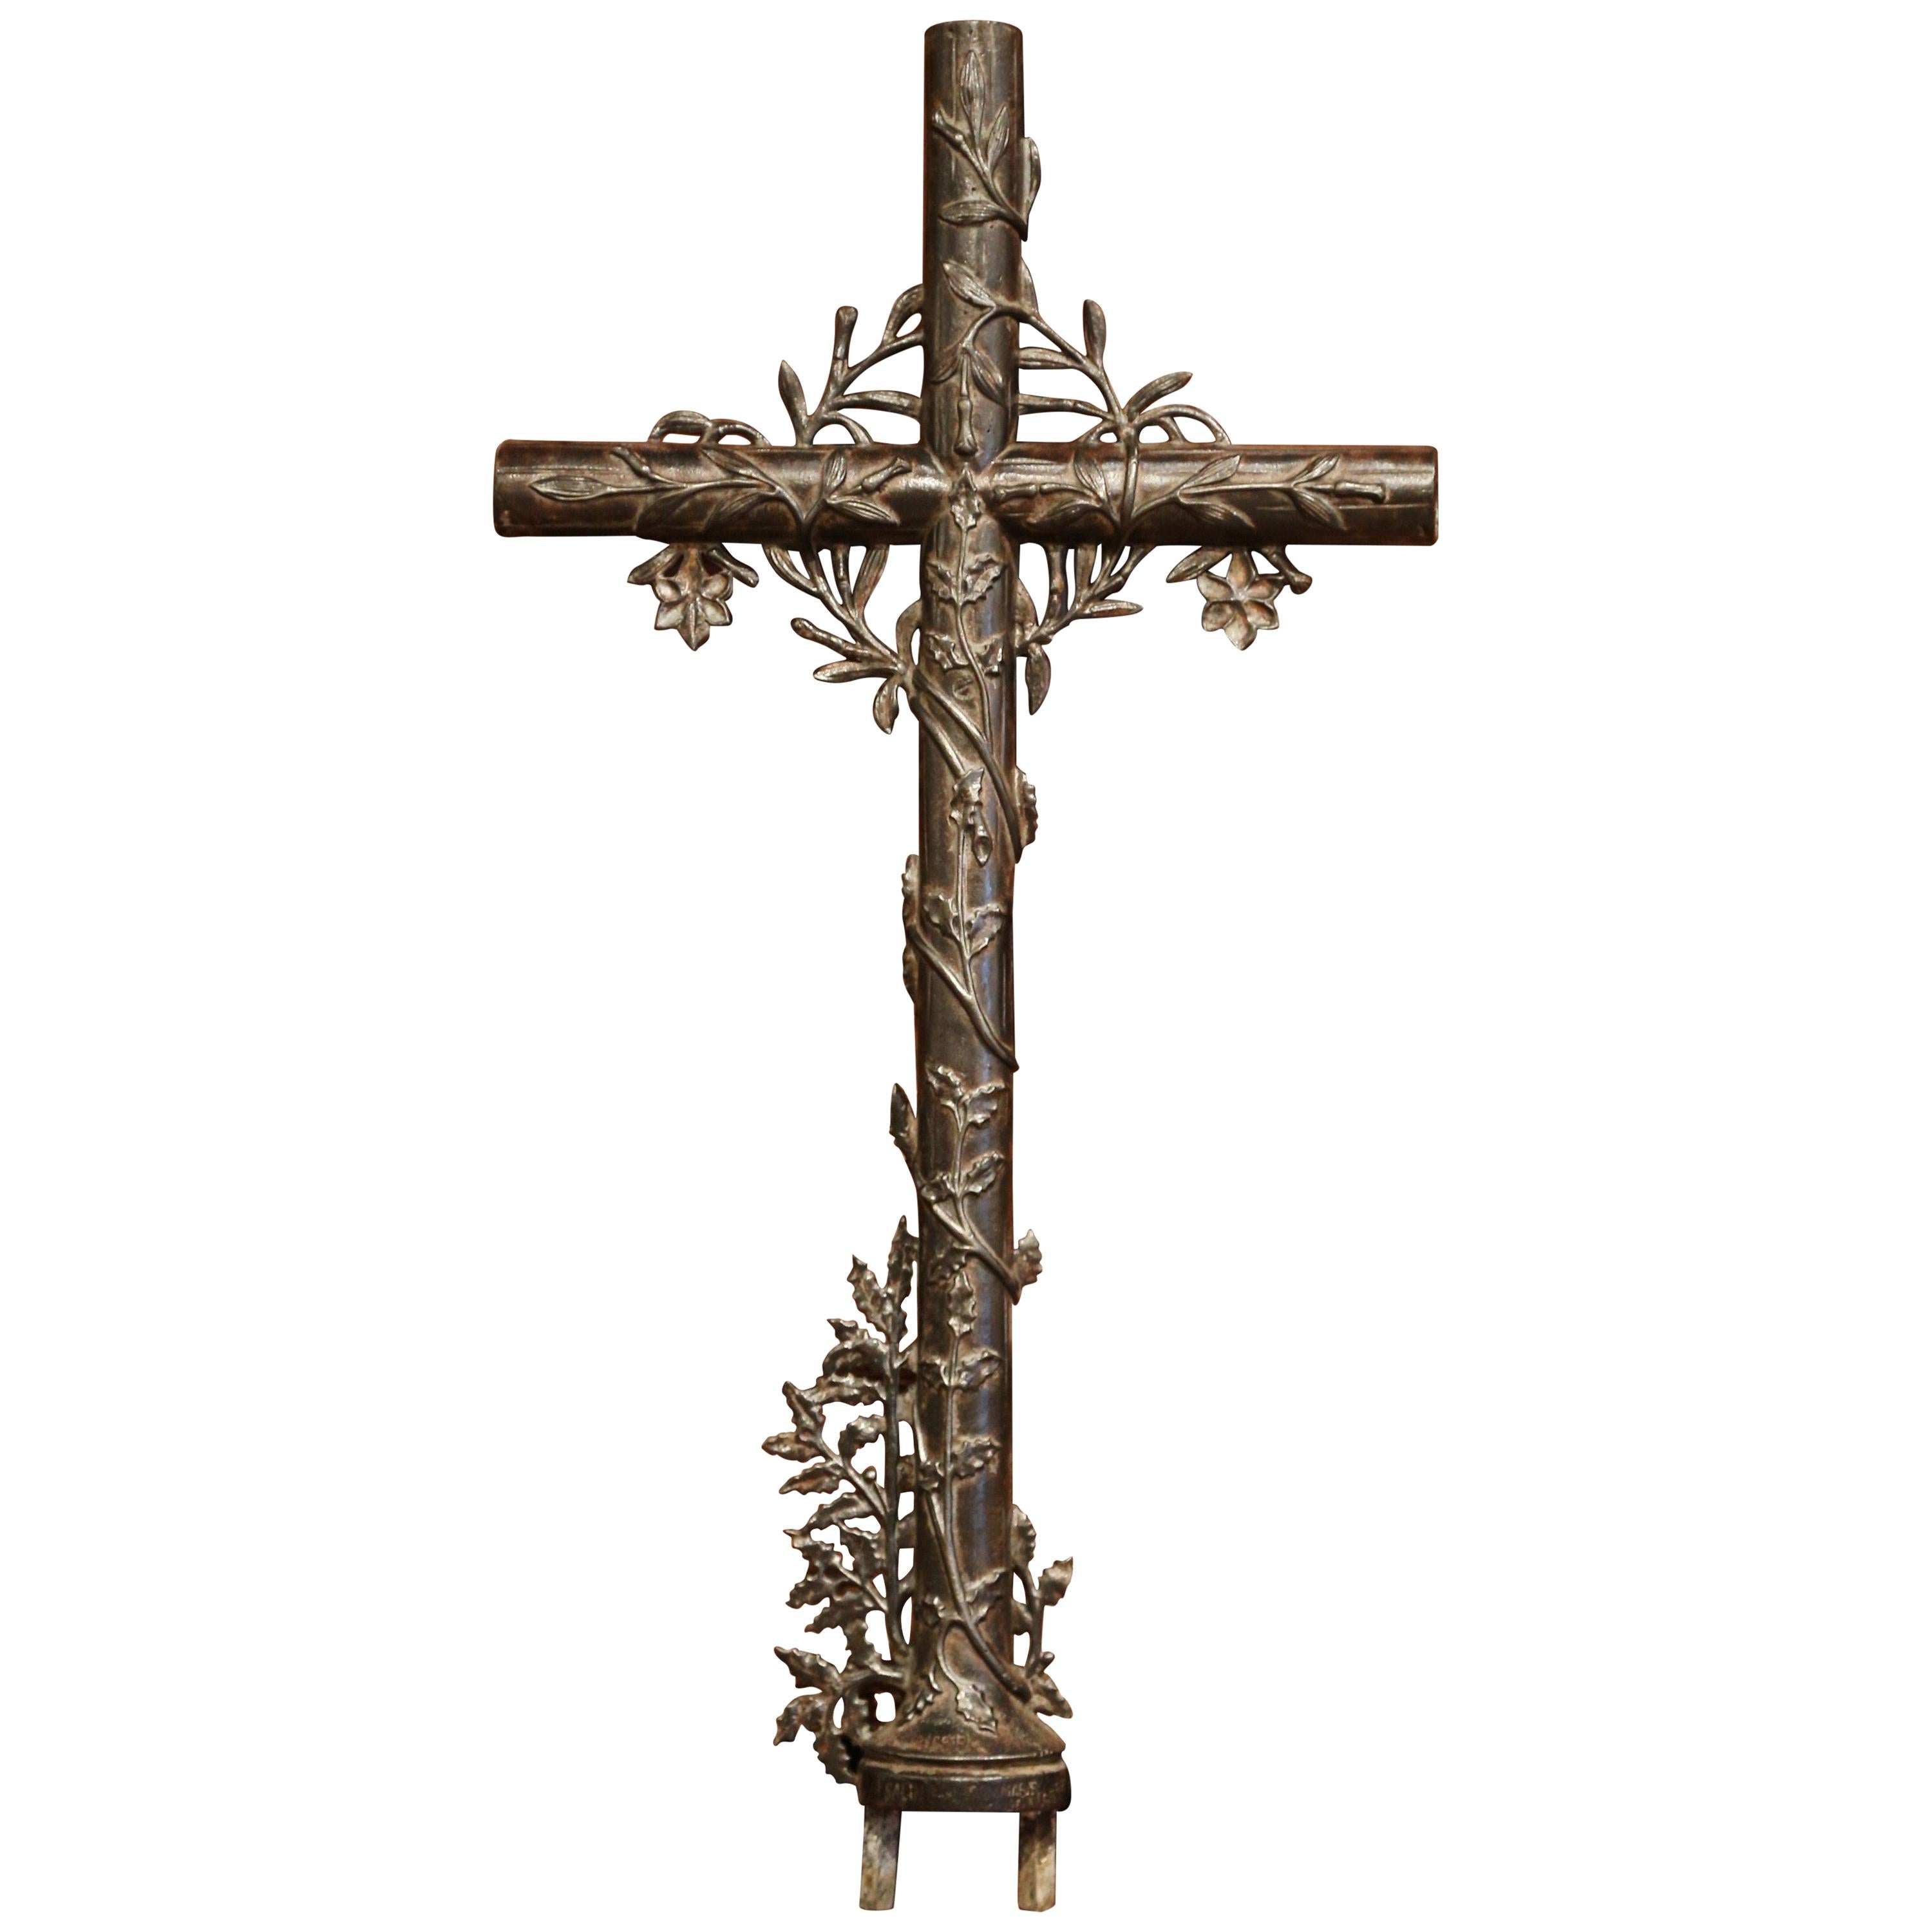 19th Century French Polished and Patinated Iron Garden Cross with Floral Motifs